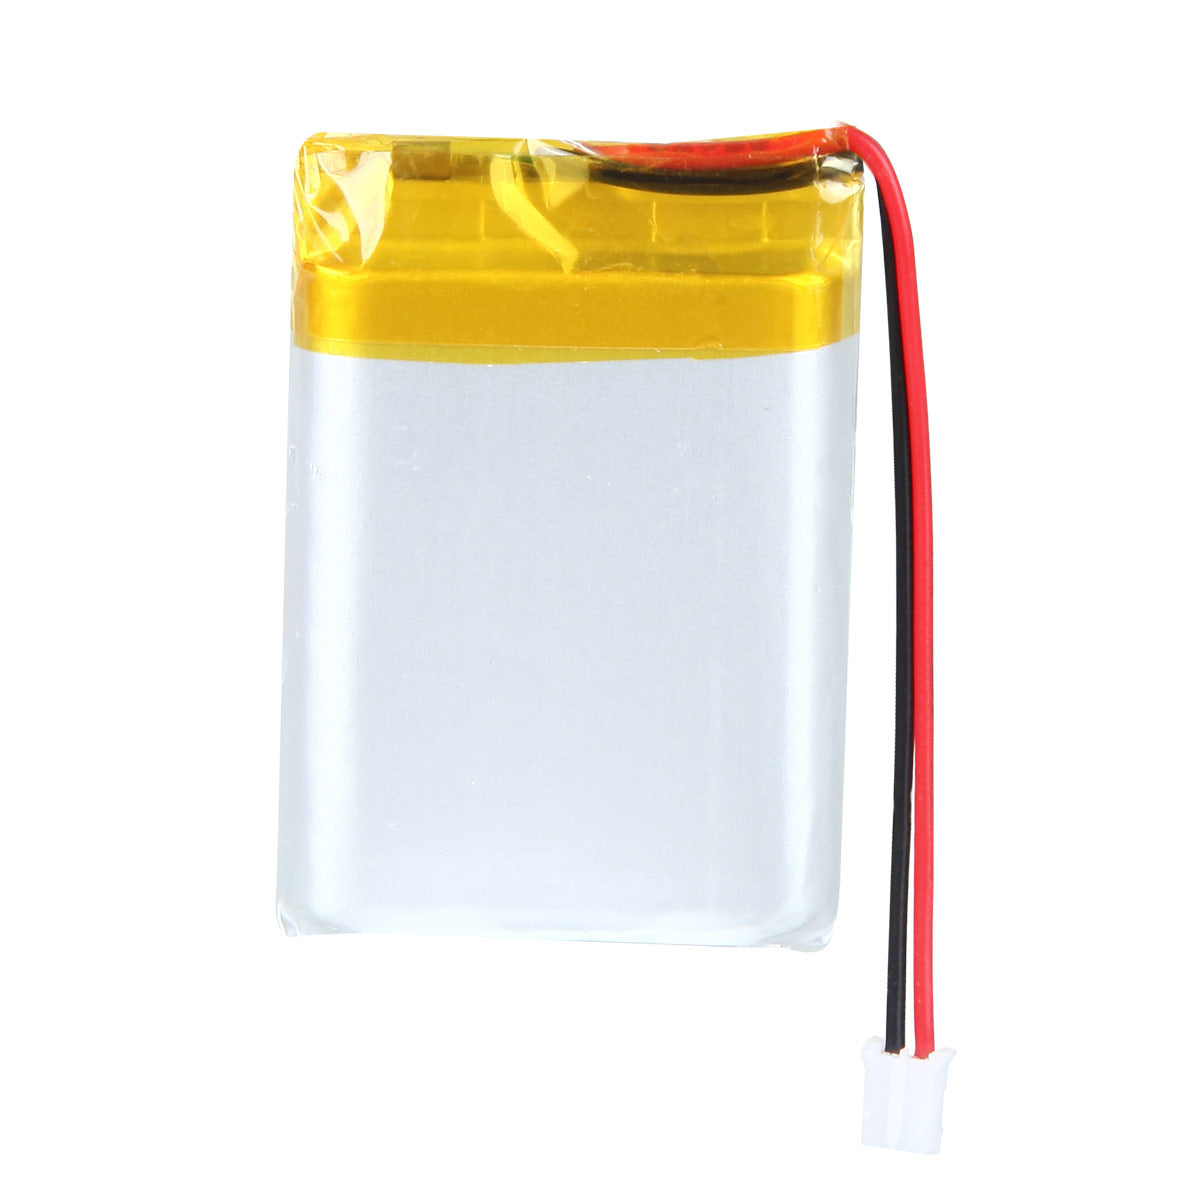 YDL 3.7V 1000mAh 853040 Rechargeable Polymer Lithium-Ion Battery